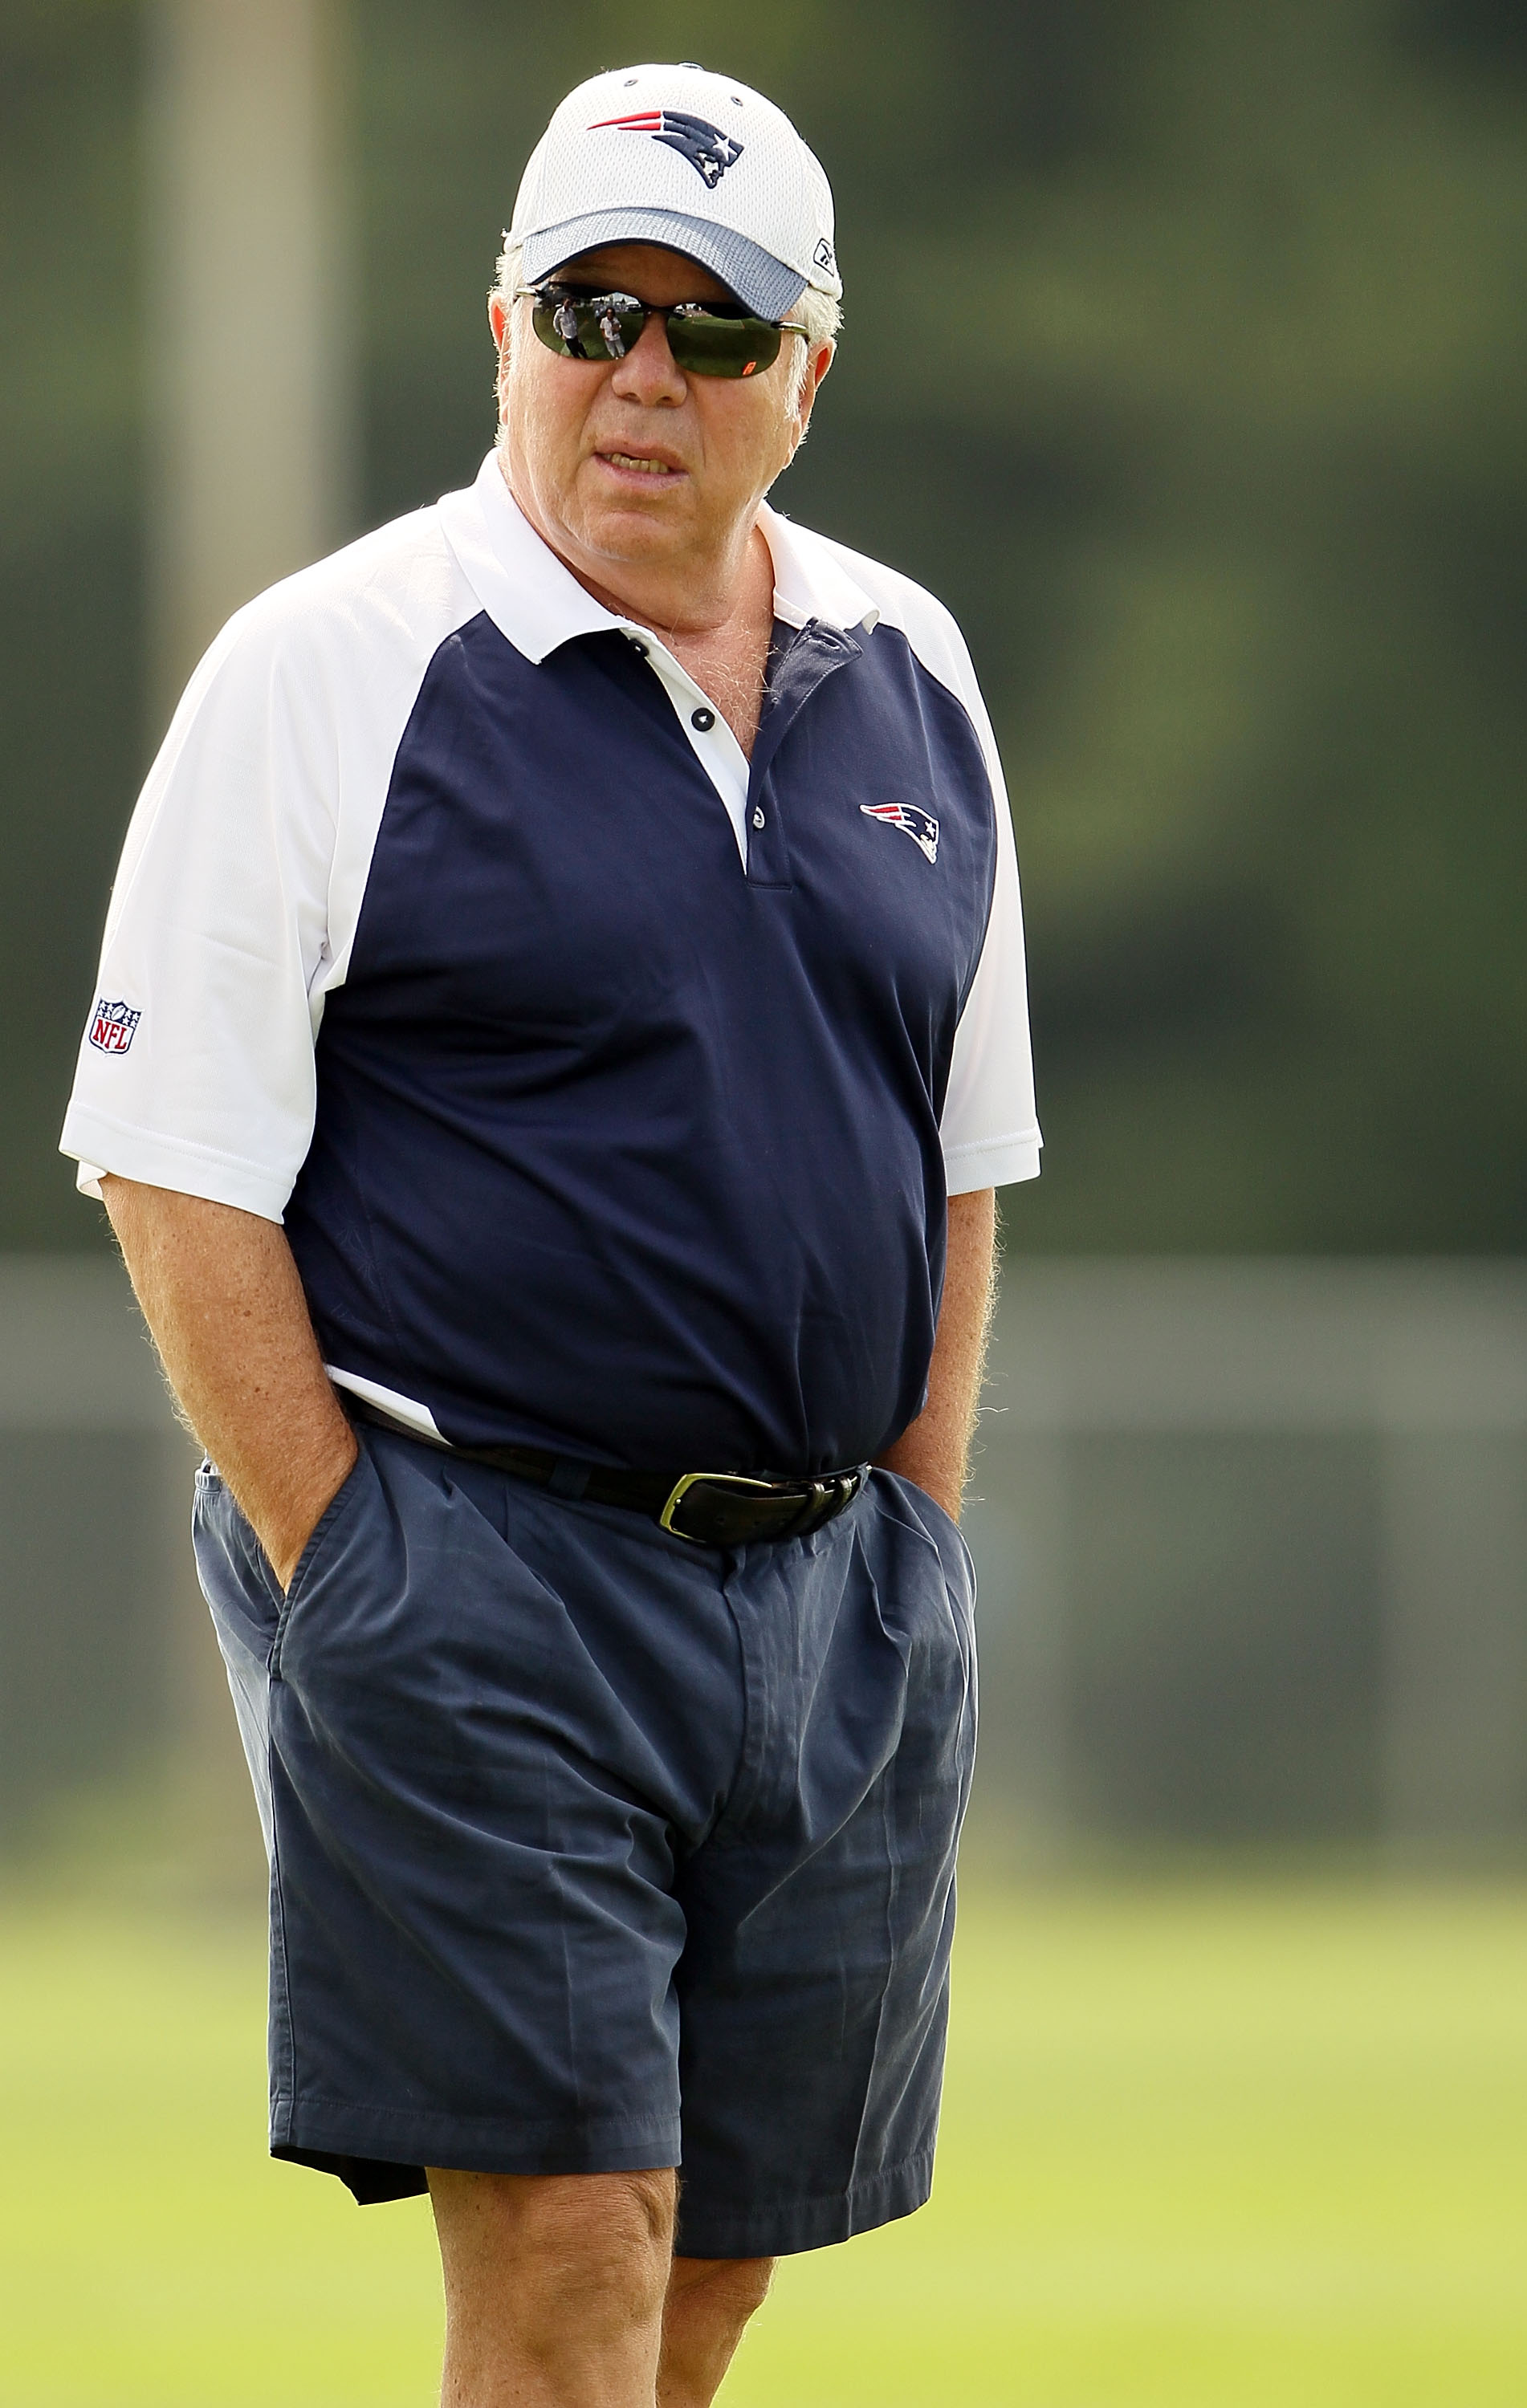 FOXBORO, MA - AUGUST 02:  Owner Bob Kraft of the New England Patriots watches his team in training camp on August 2, 2010 at Gillette Stadium in Foxboro, Massachusetts.  (Photo by Elsa/Getty Images)